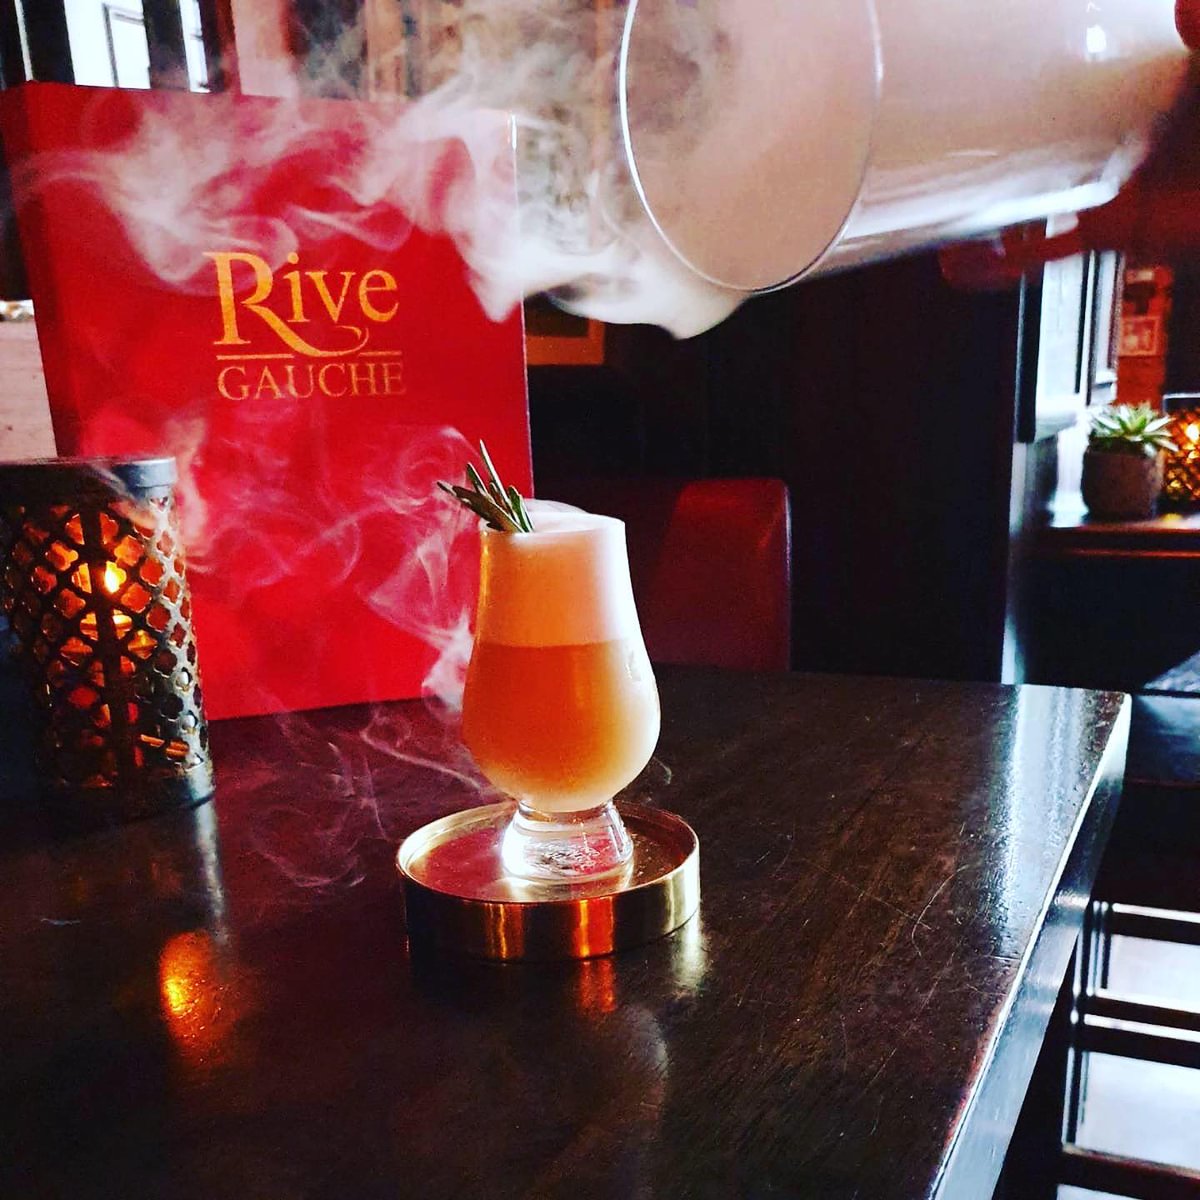 Have you tried our Cocktail of the Month? Rosemary Smoke 👌🏼🔥🍹 •Glemorangie •Rhubarb •Ginger •Apricot •Orange Bitters •Egg Whites •Rosemary #cocktailofthemonth #rivegauche #rosemarysmoke #glemorangie